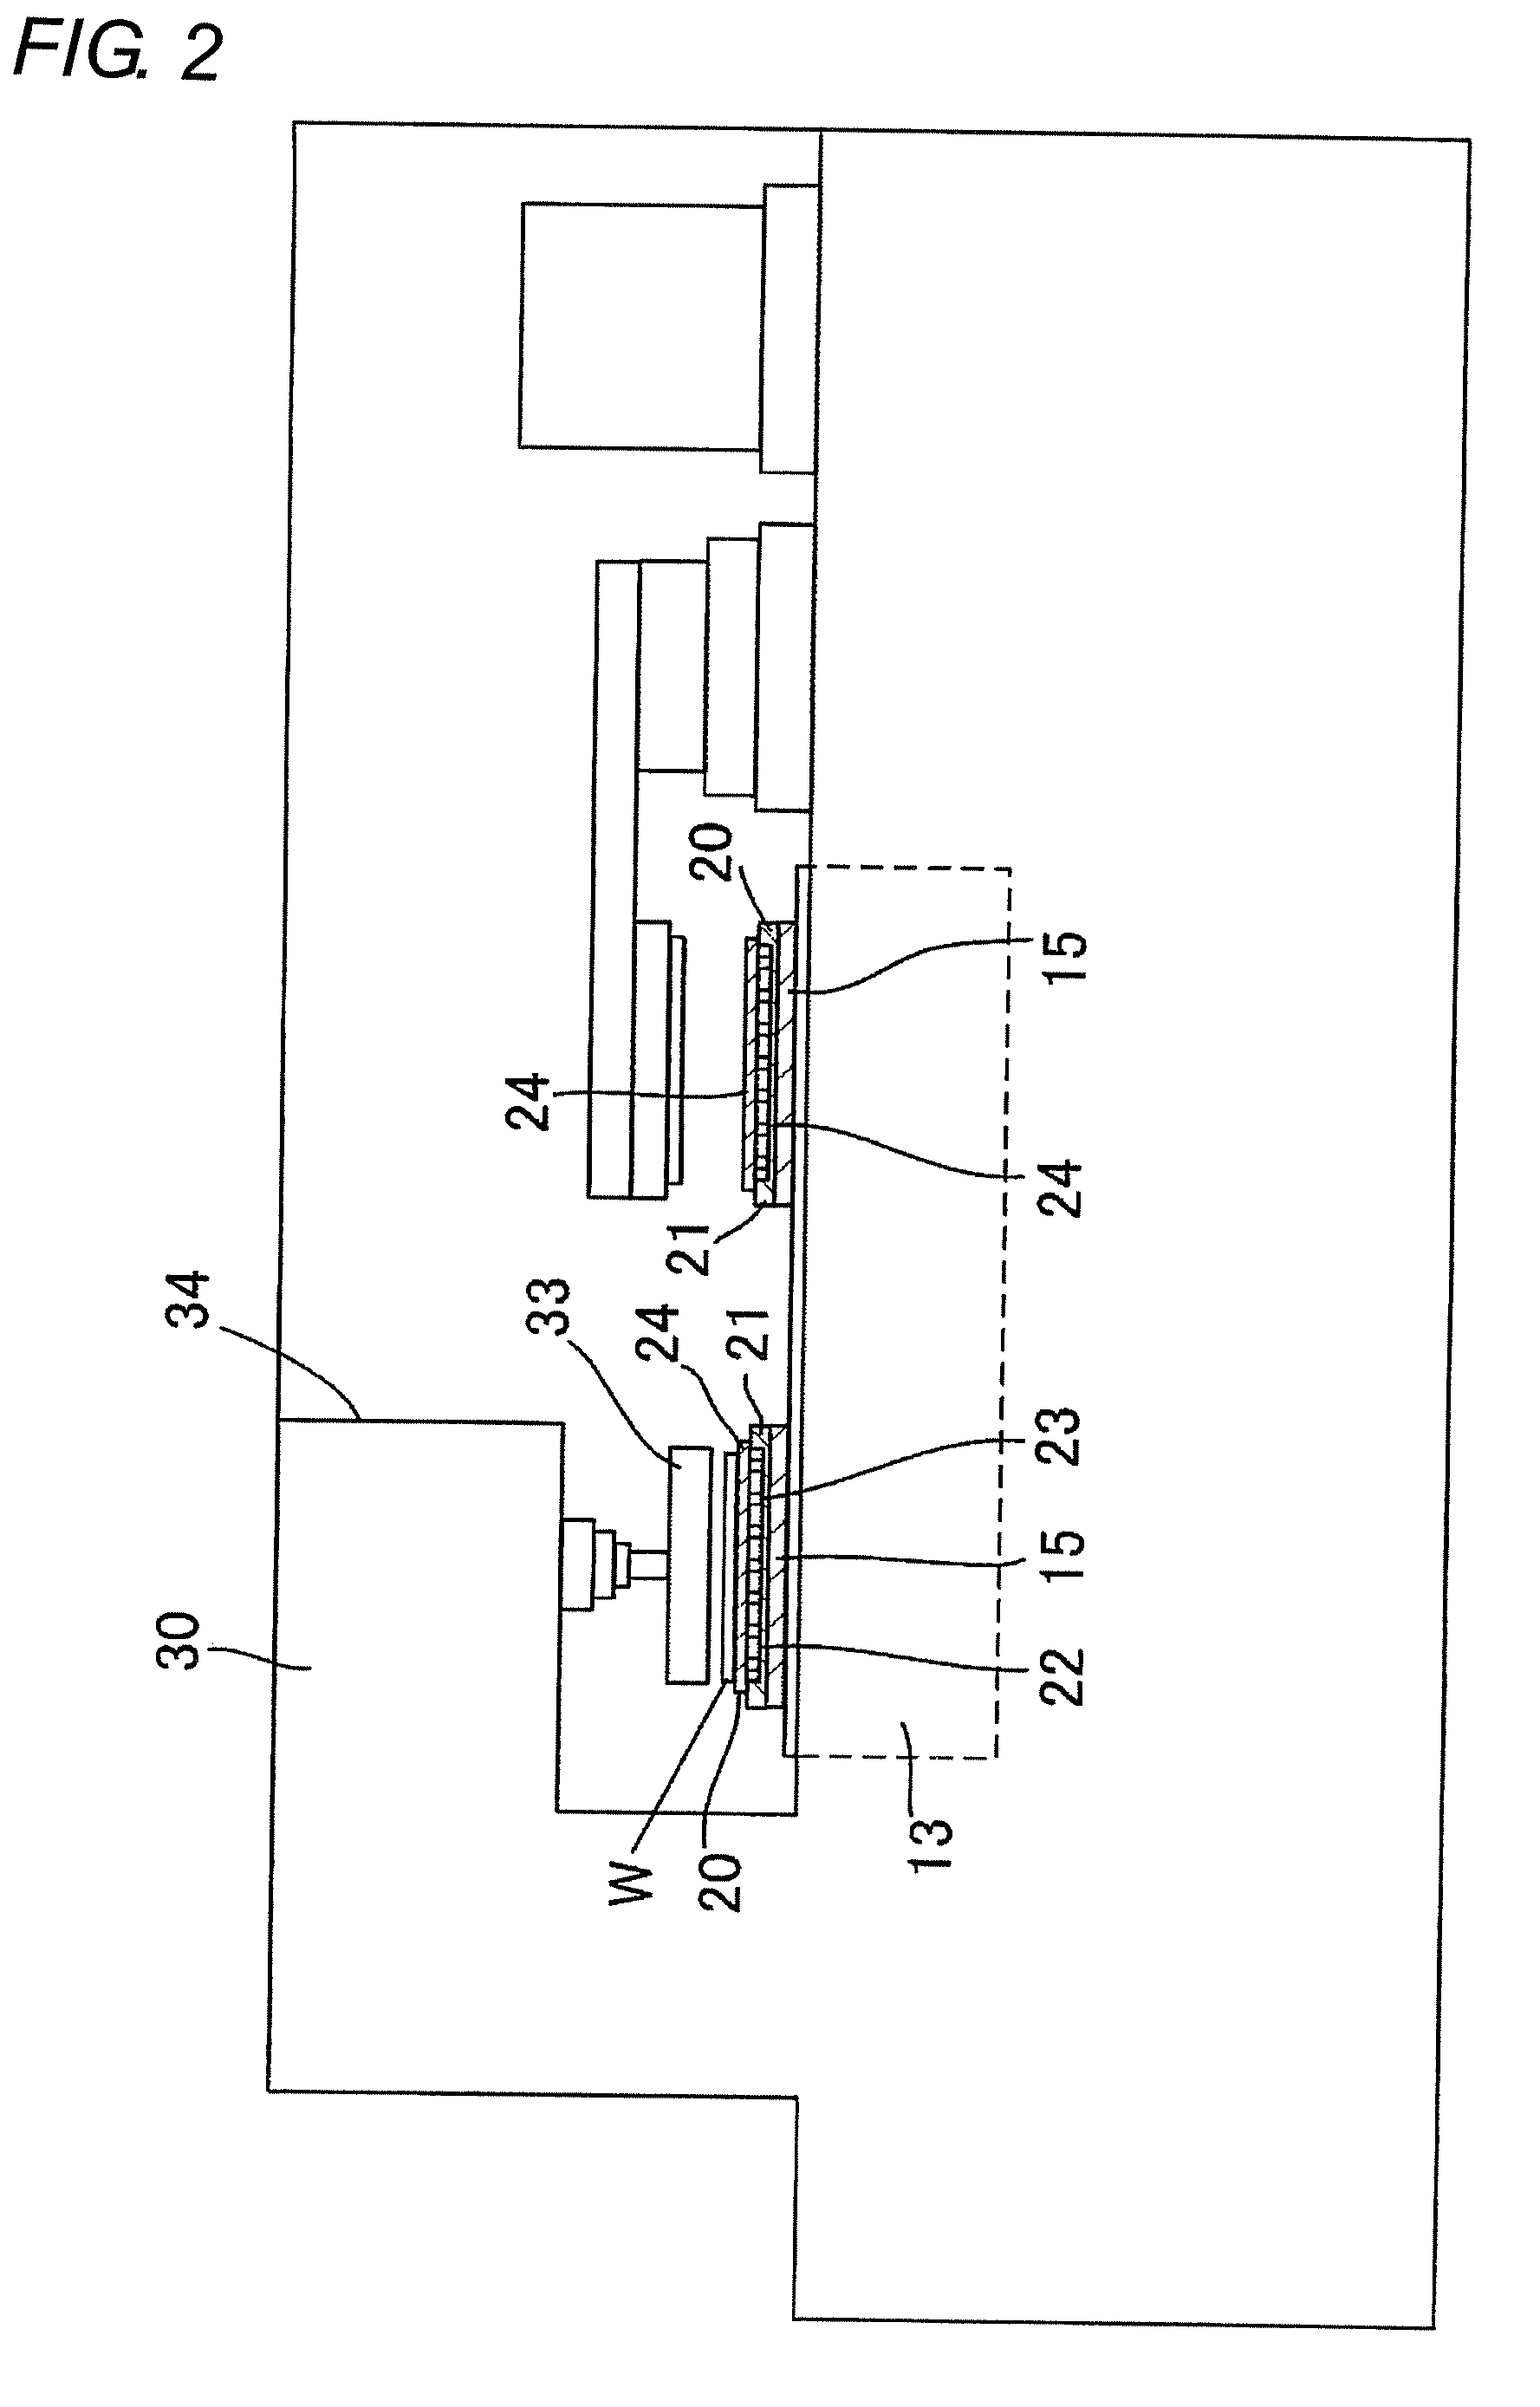 Holding jig, semiconductor wafer grinding method, semiconductor wafer protecting structure and semiconductor wafer grinding method and semiconductor chip fabrication method using the structure